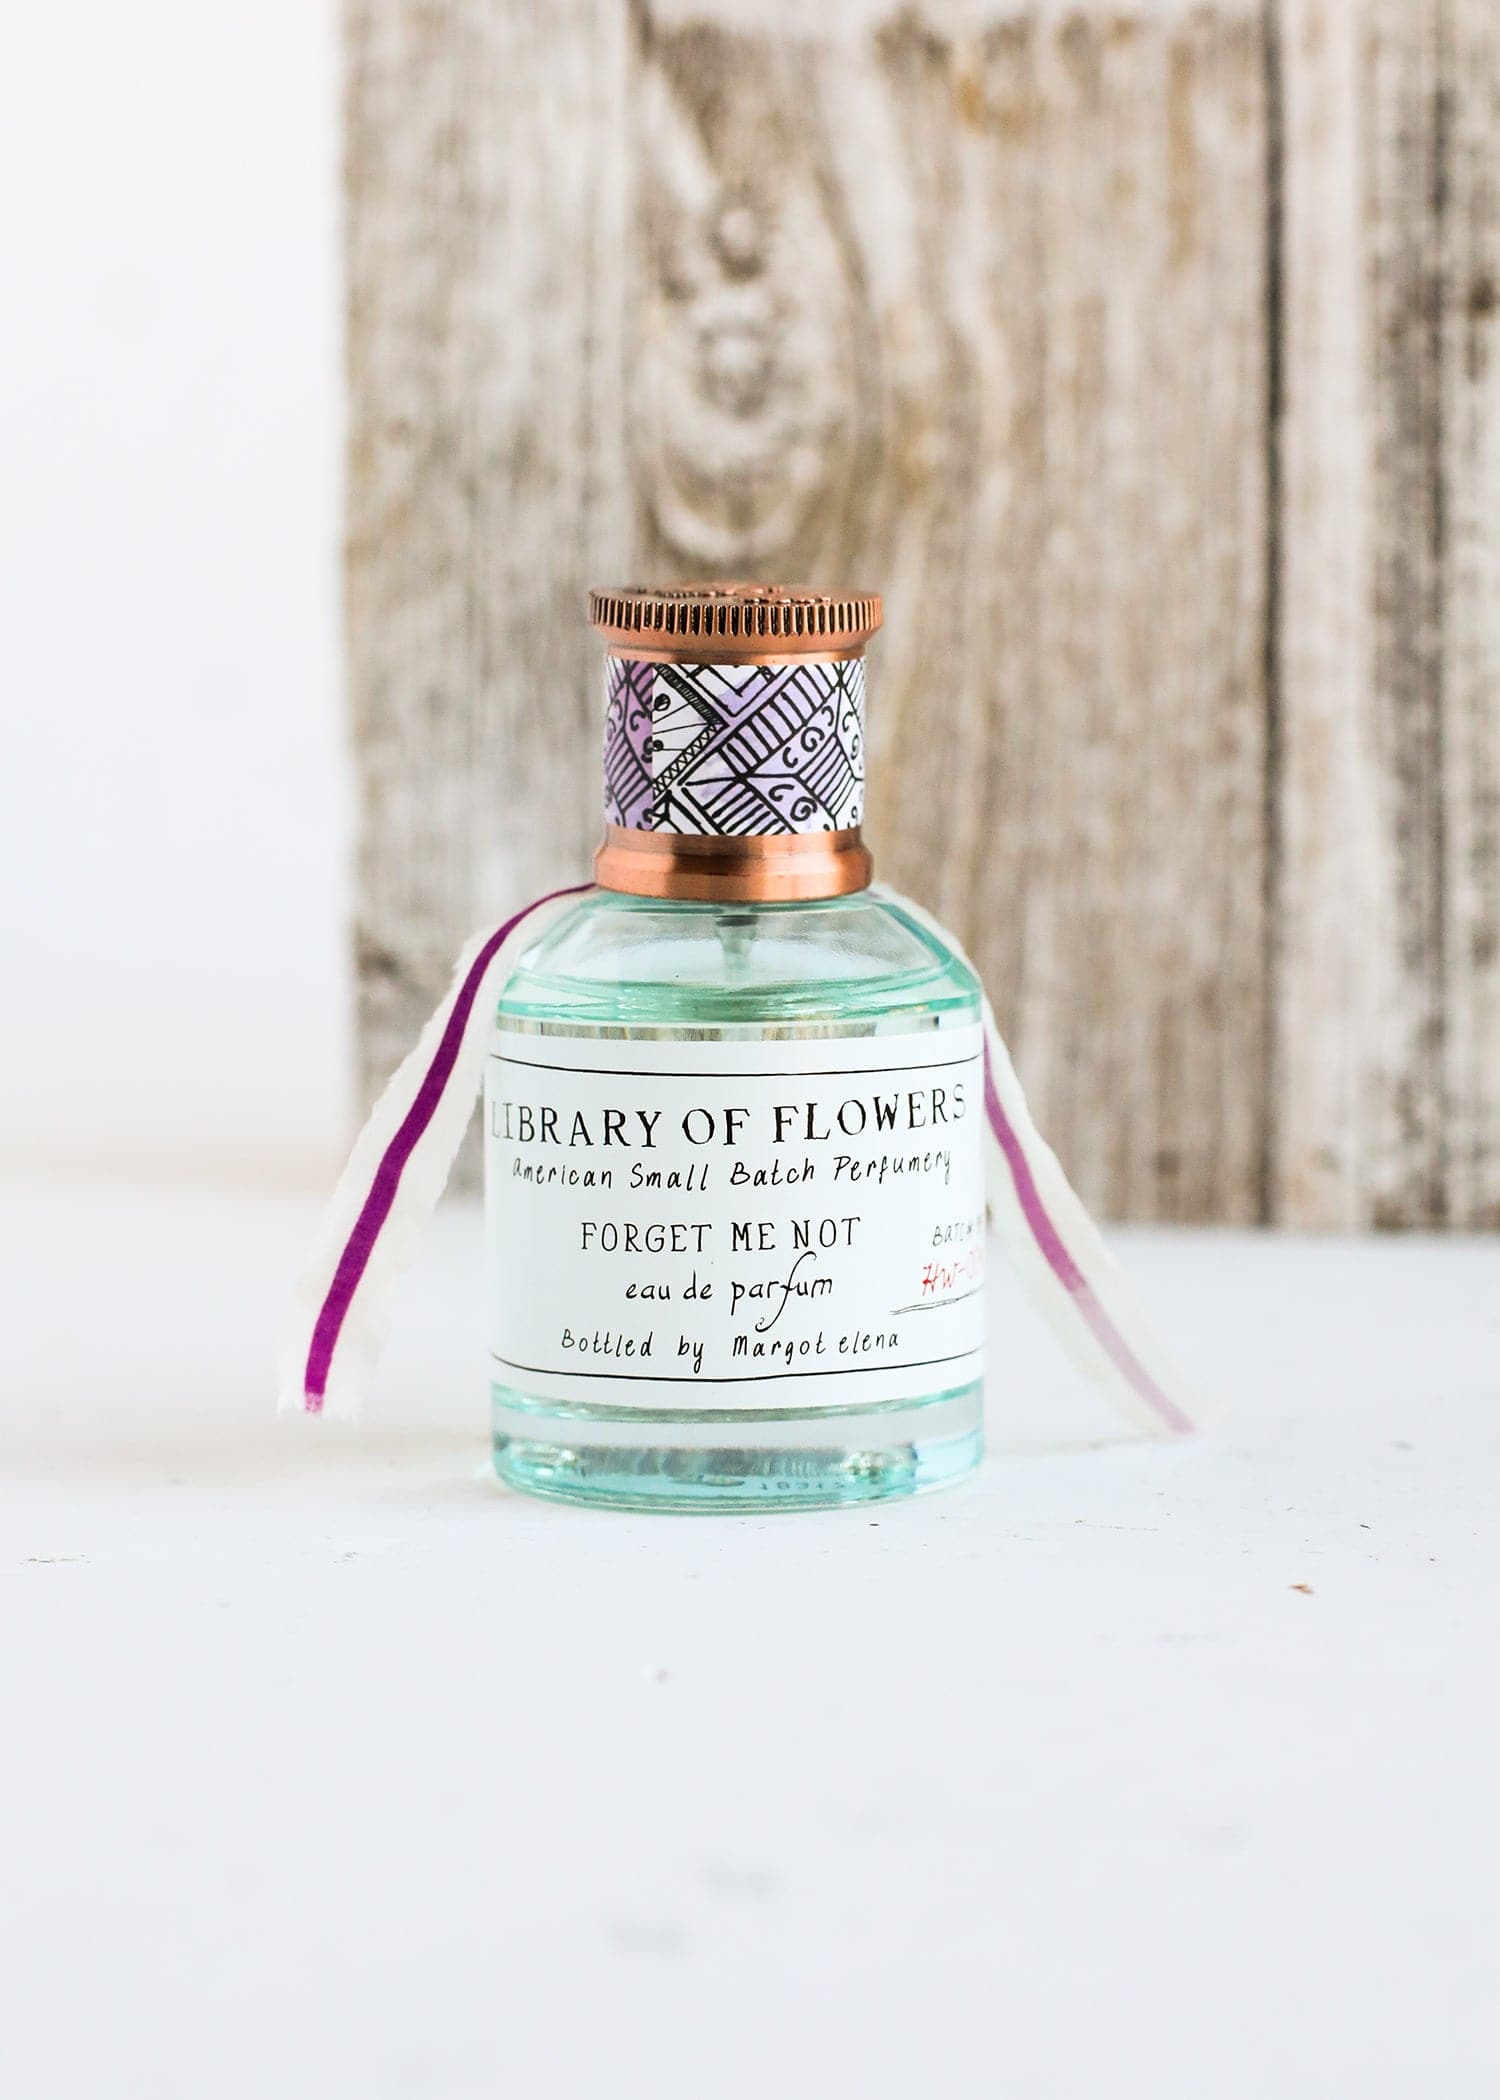 Library of Flowers Forget Me Not Fine Perfume | Margot Elena